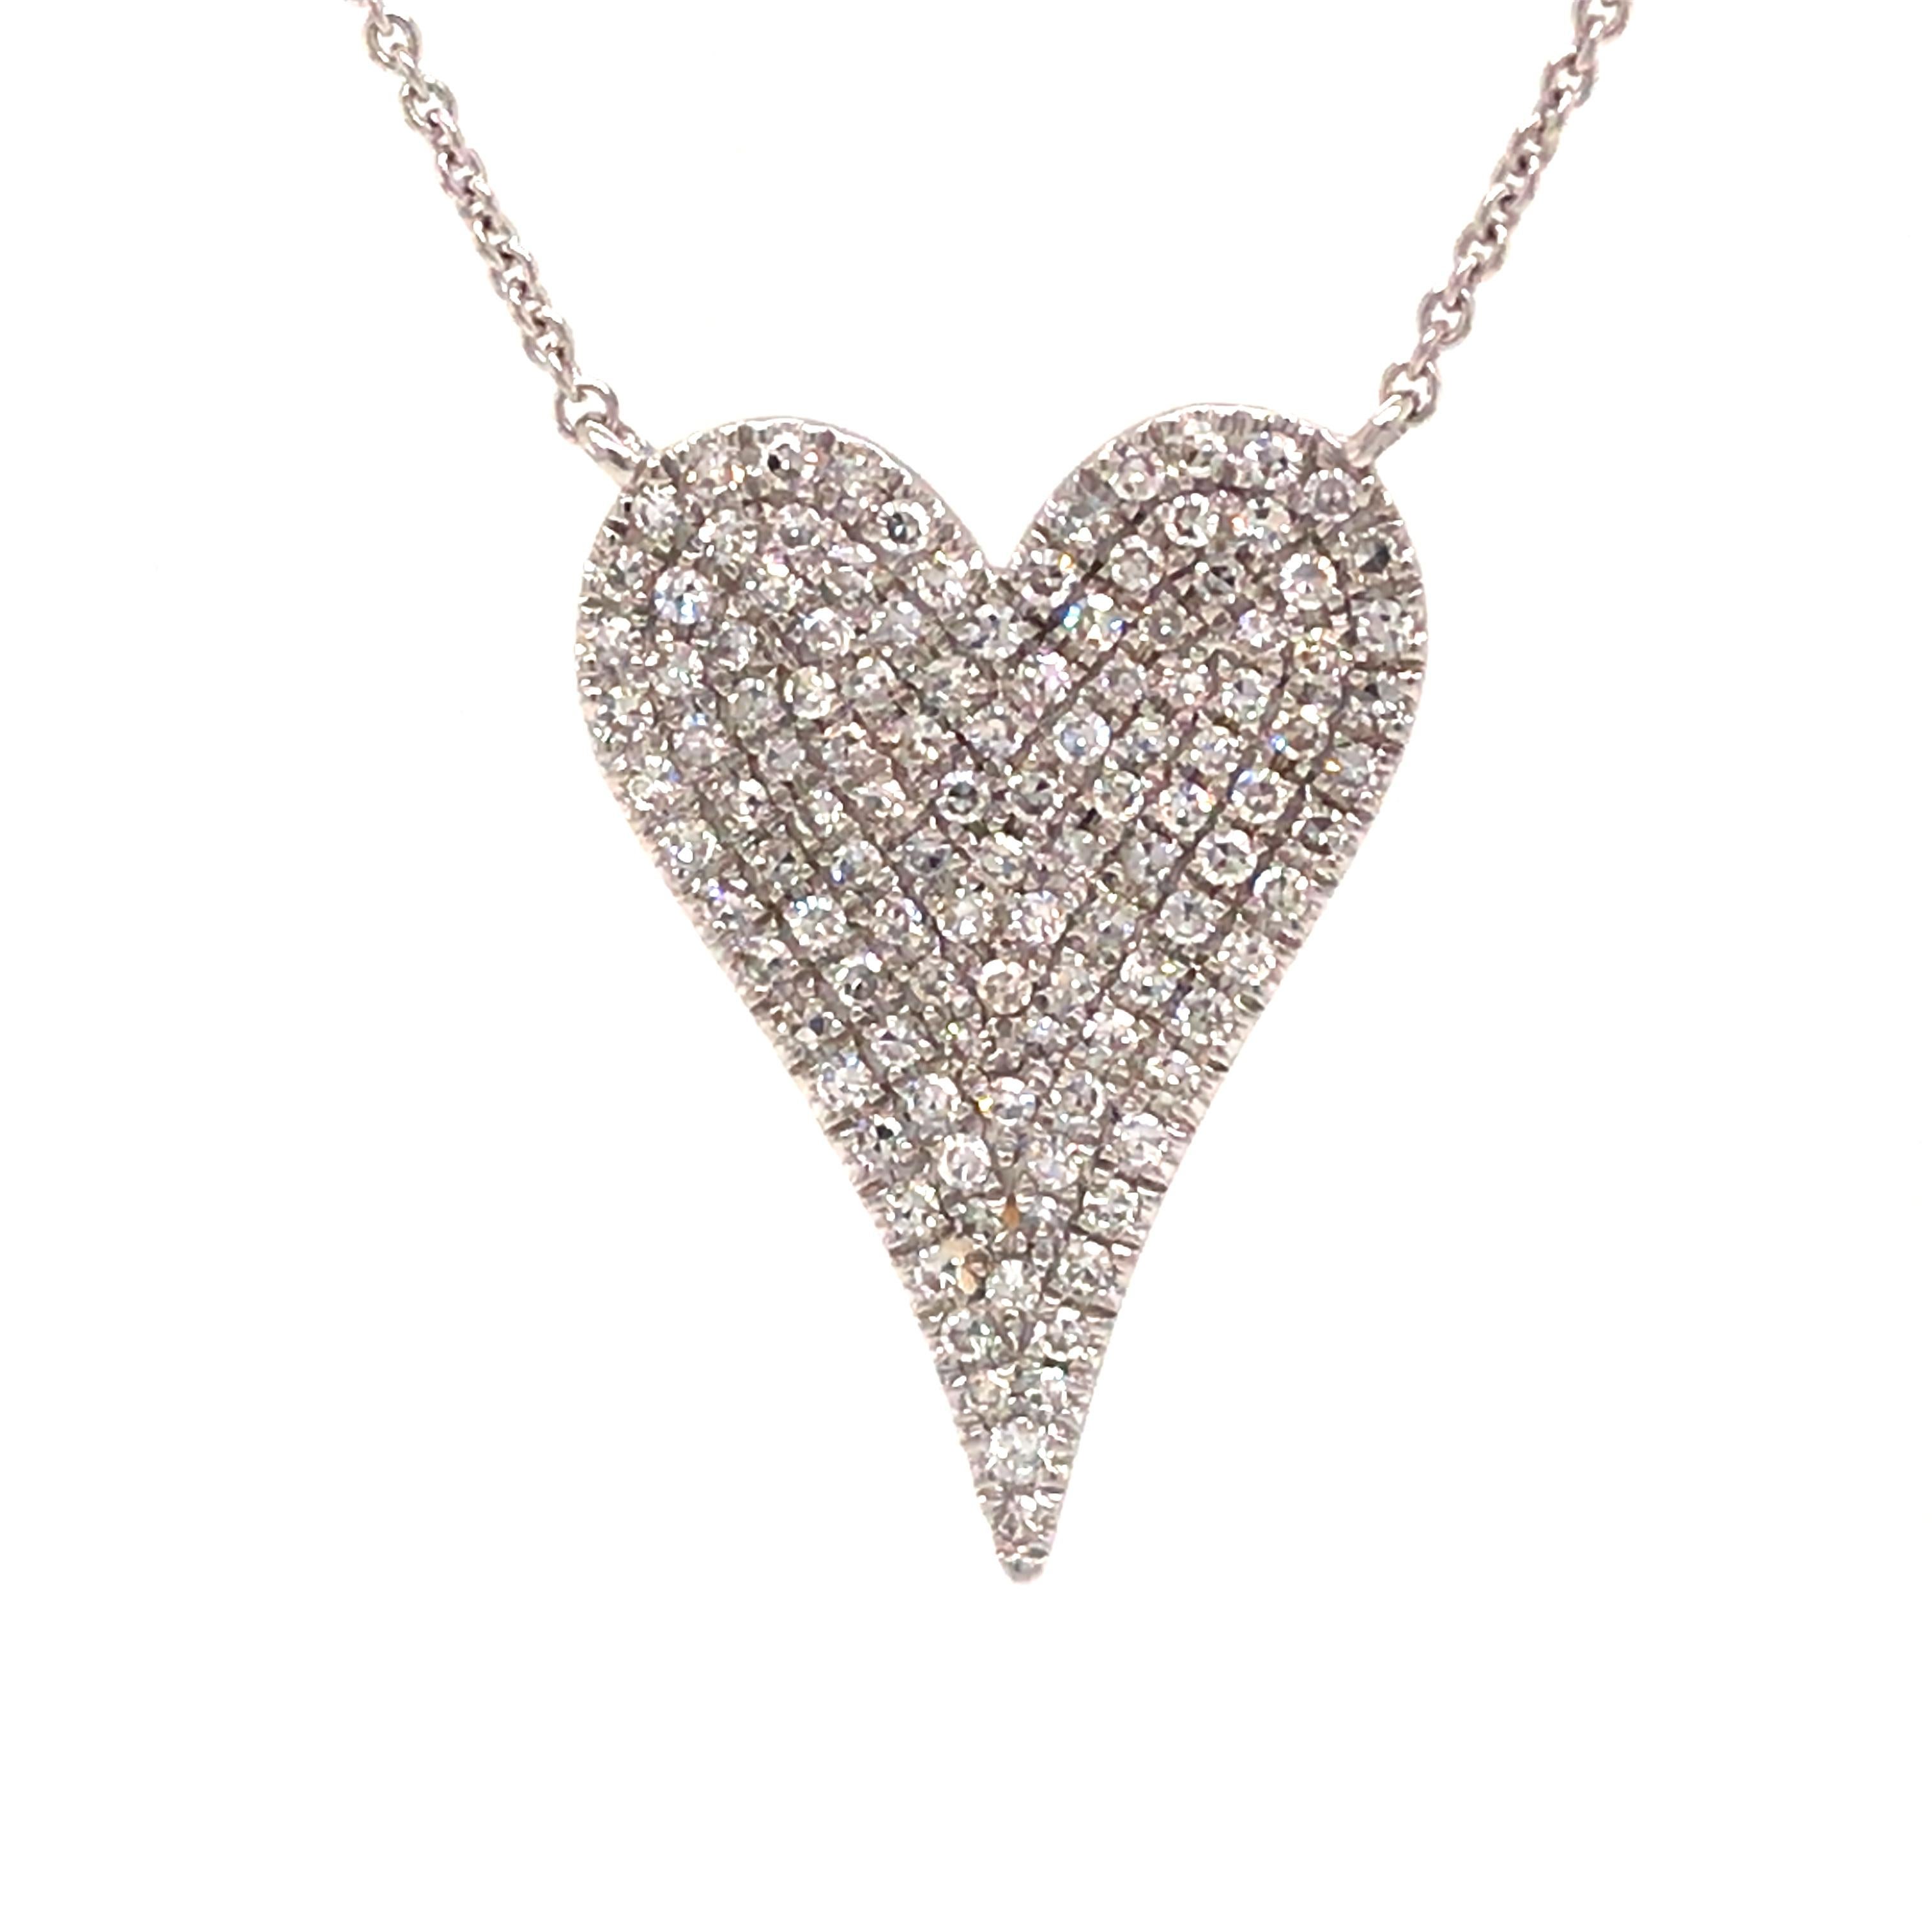 Diamond Pave Heart Necklace in 14K White Gold.  Round Brilliant Cut Diamonds weighing 0.38 carat total weight, G-H in color and VS-SI in clarity are expertly set.  The Necklace measures 17 inch in length and the Pendant measures 3/4 inch in length